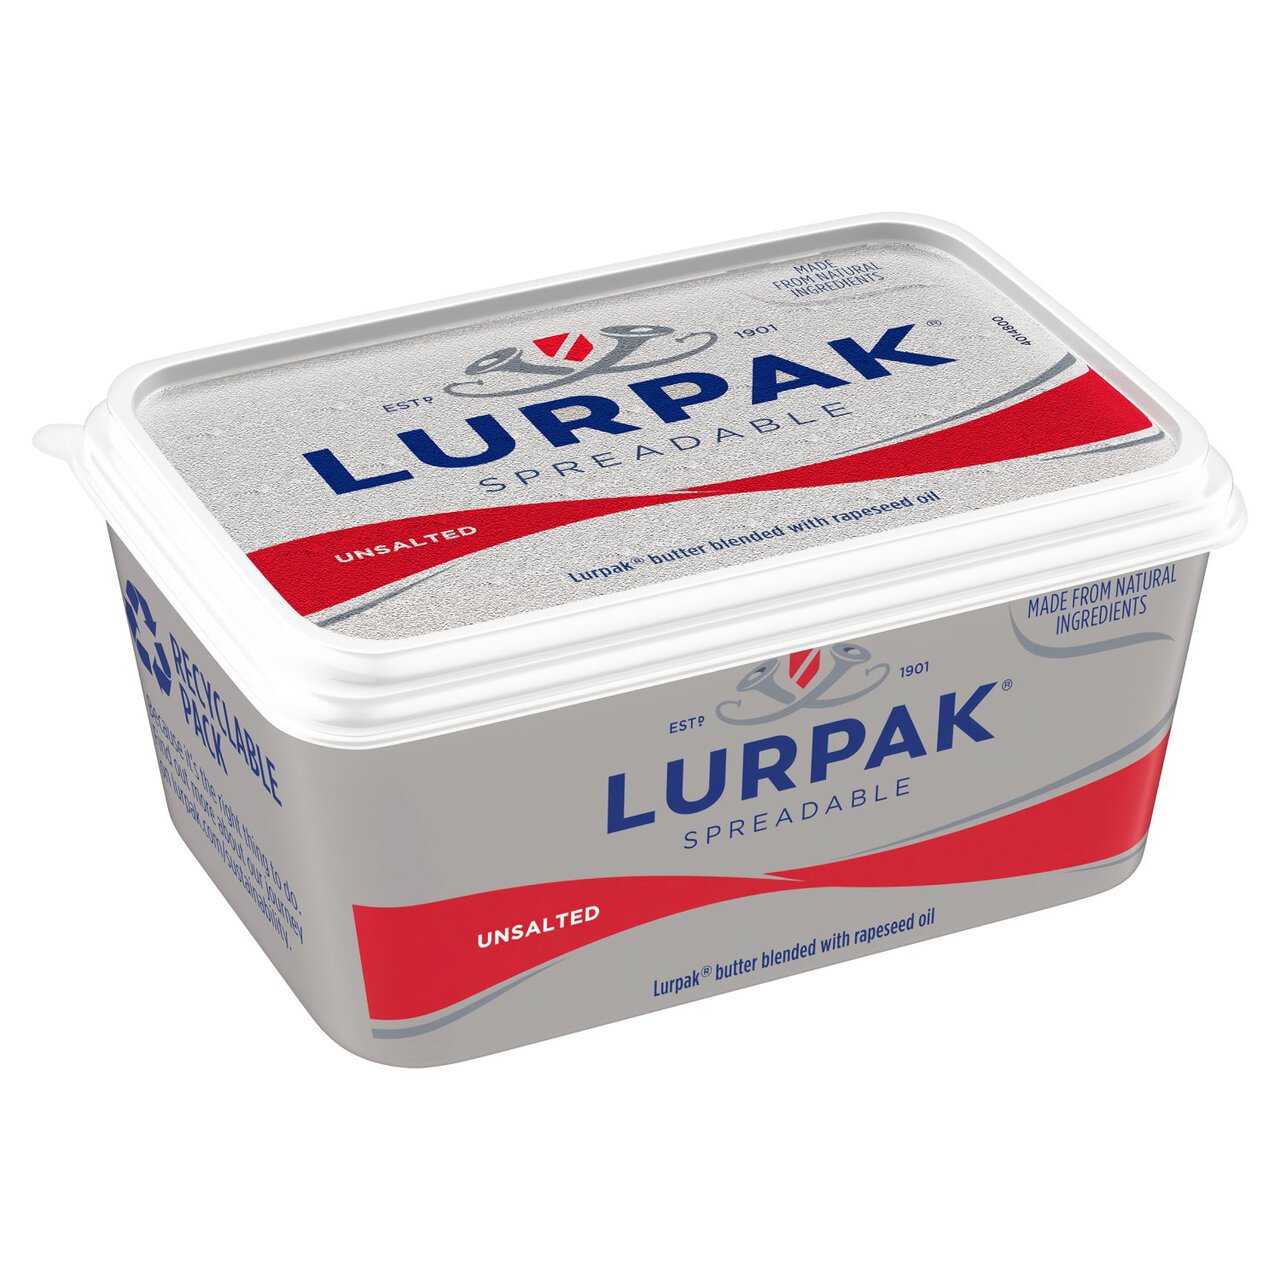 Lurpak Unsalted Spreadable Blend of Butter and Rapeseed Oil 400g